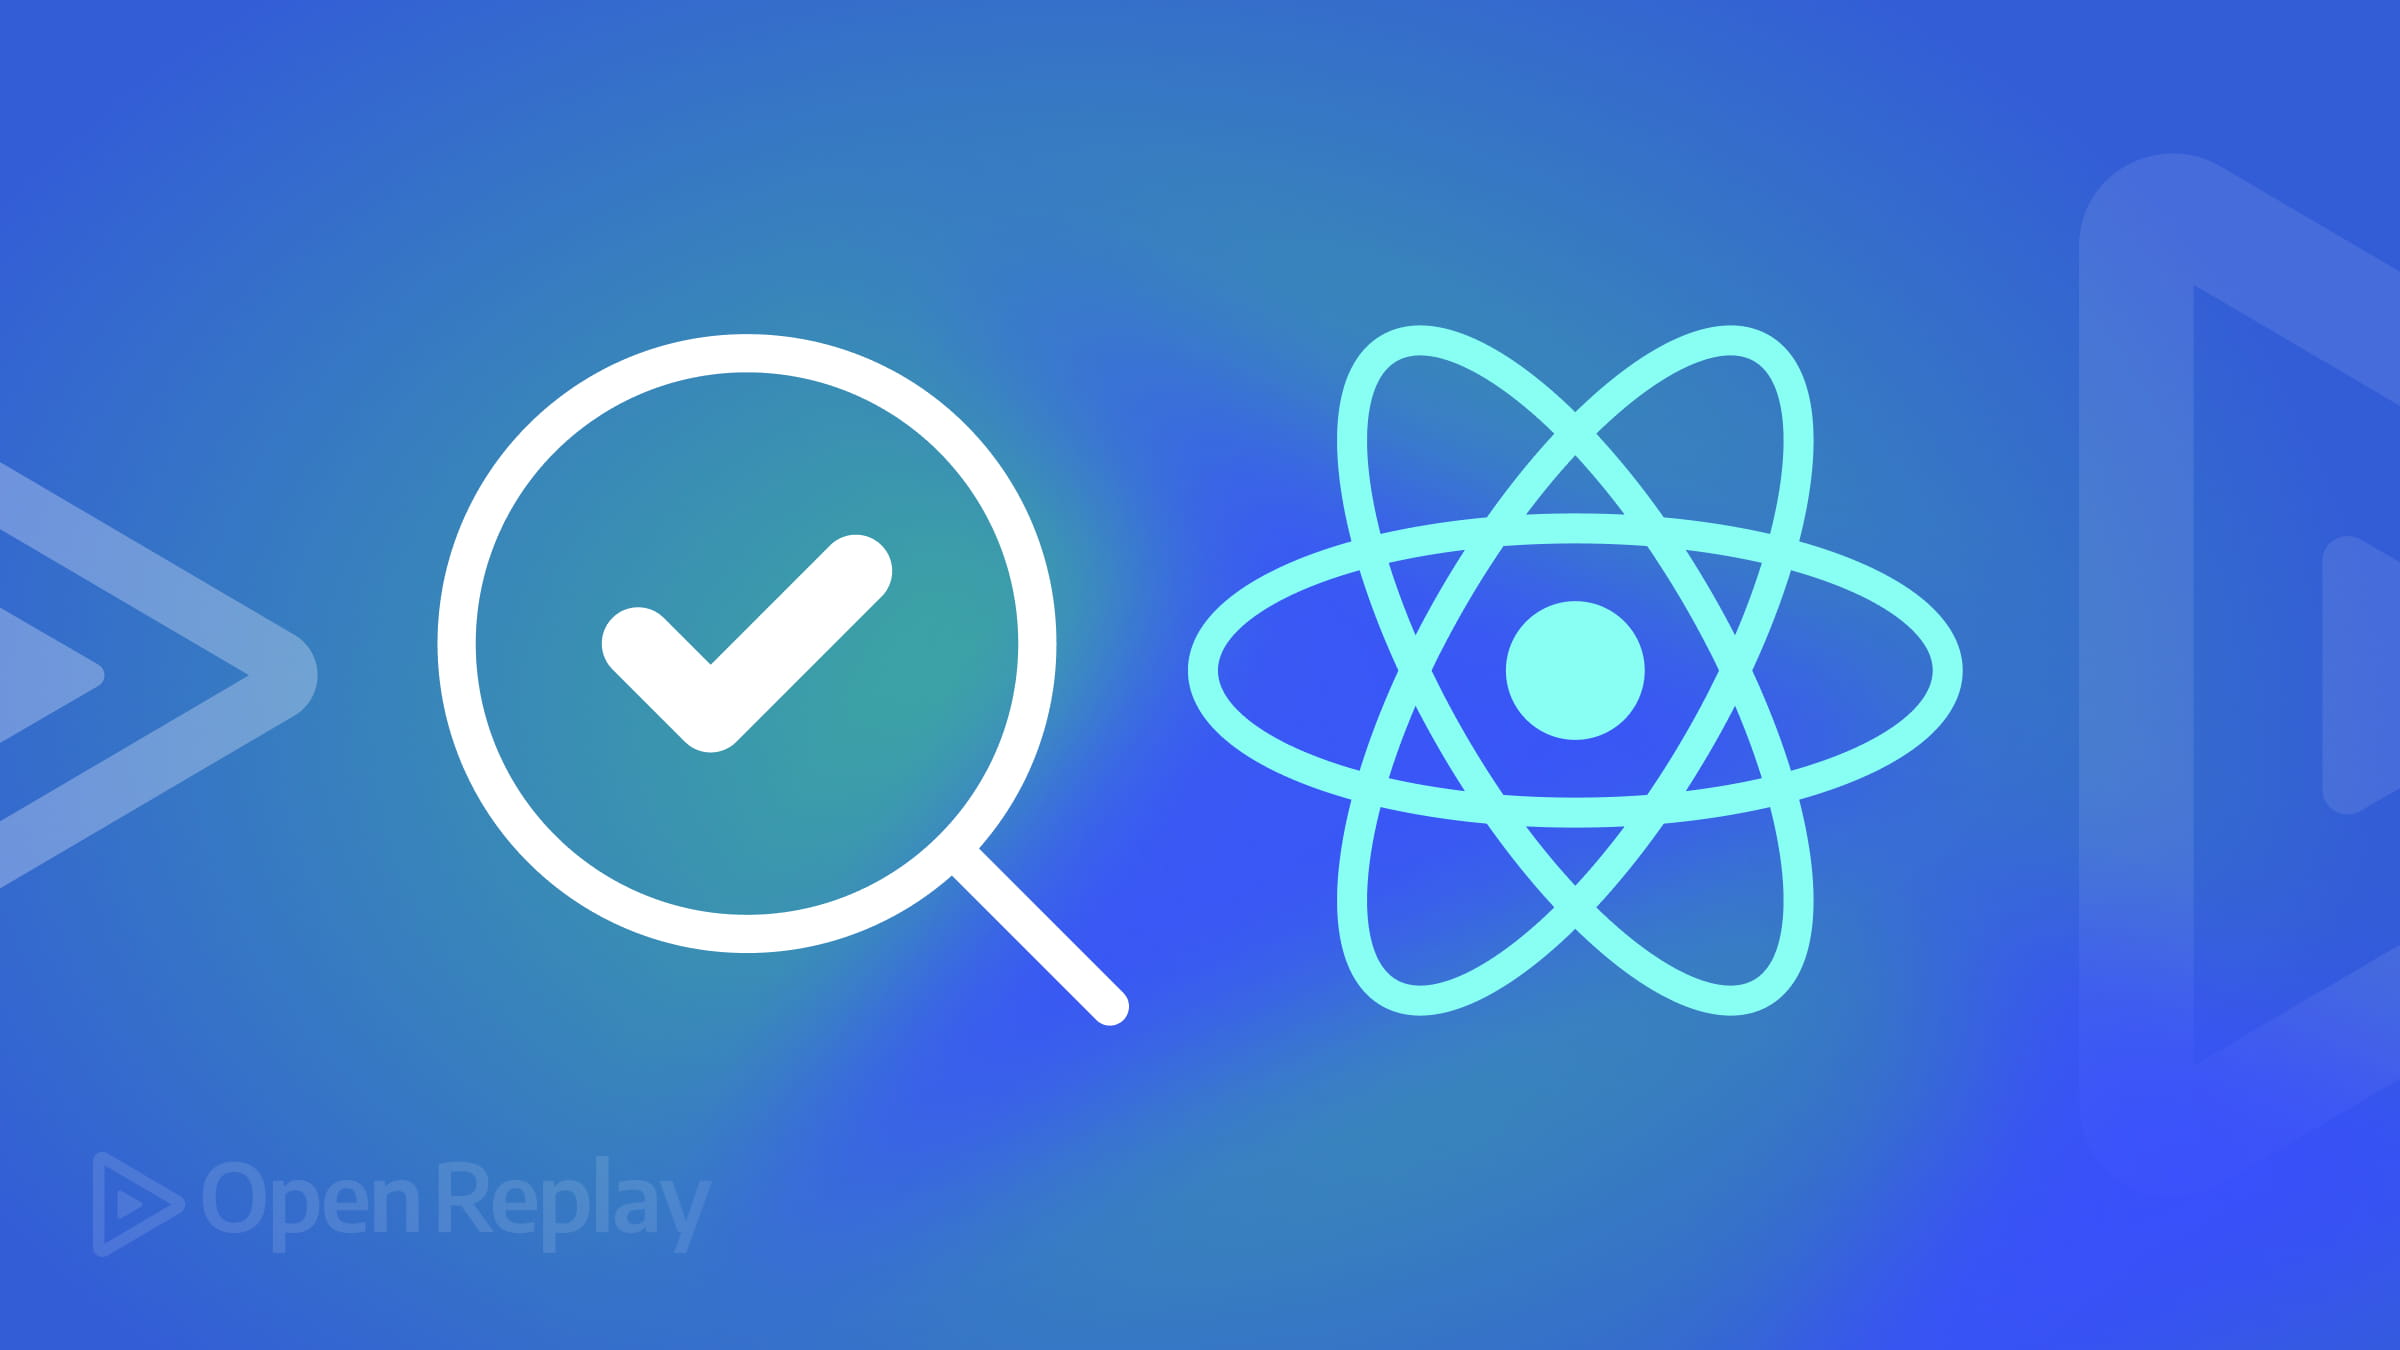 Integration Testing in React